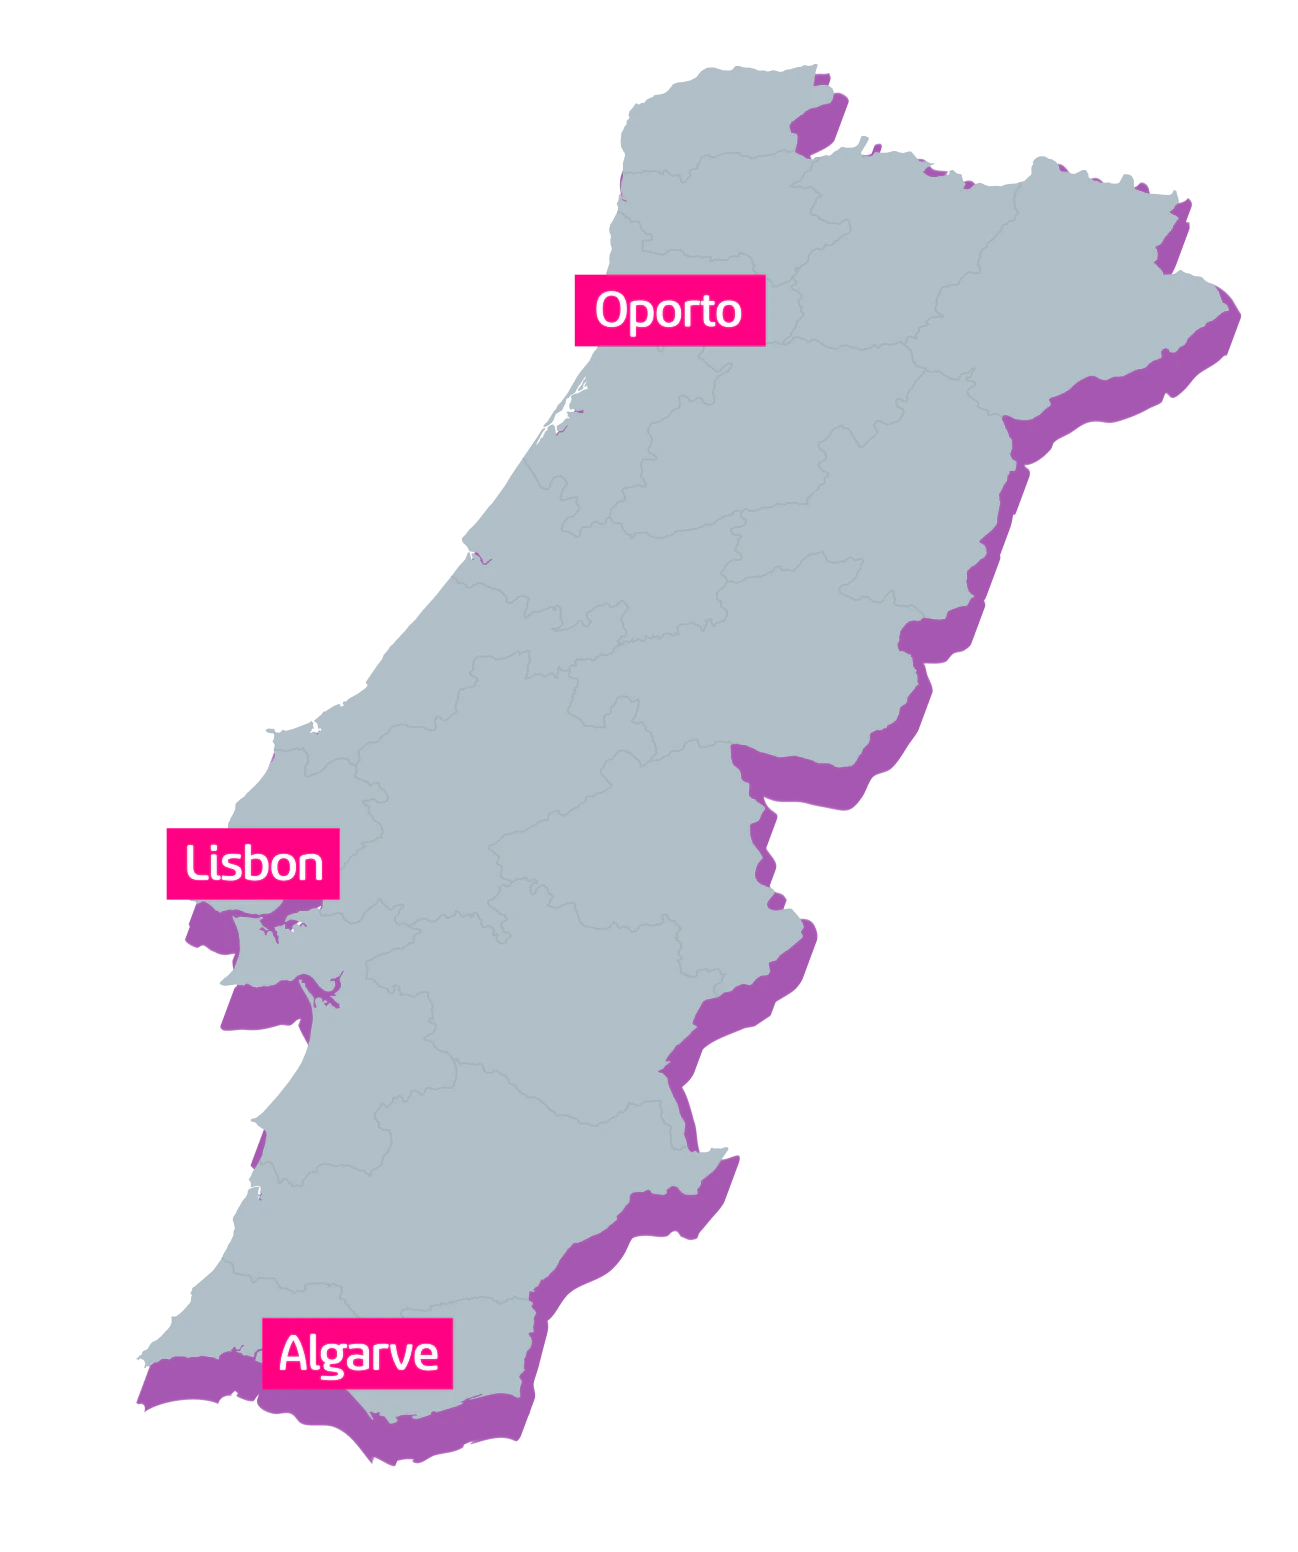 Portugal map with Oporto, Lisbon and Algarve highlighted